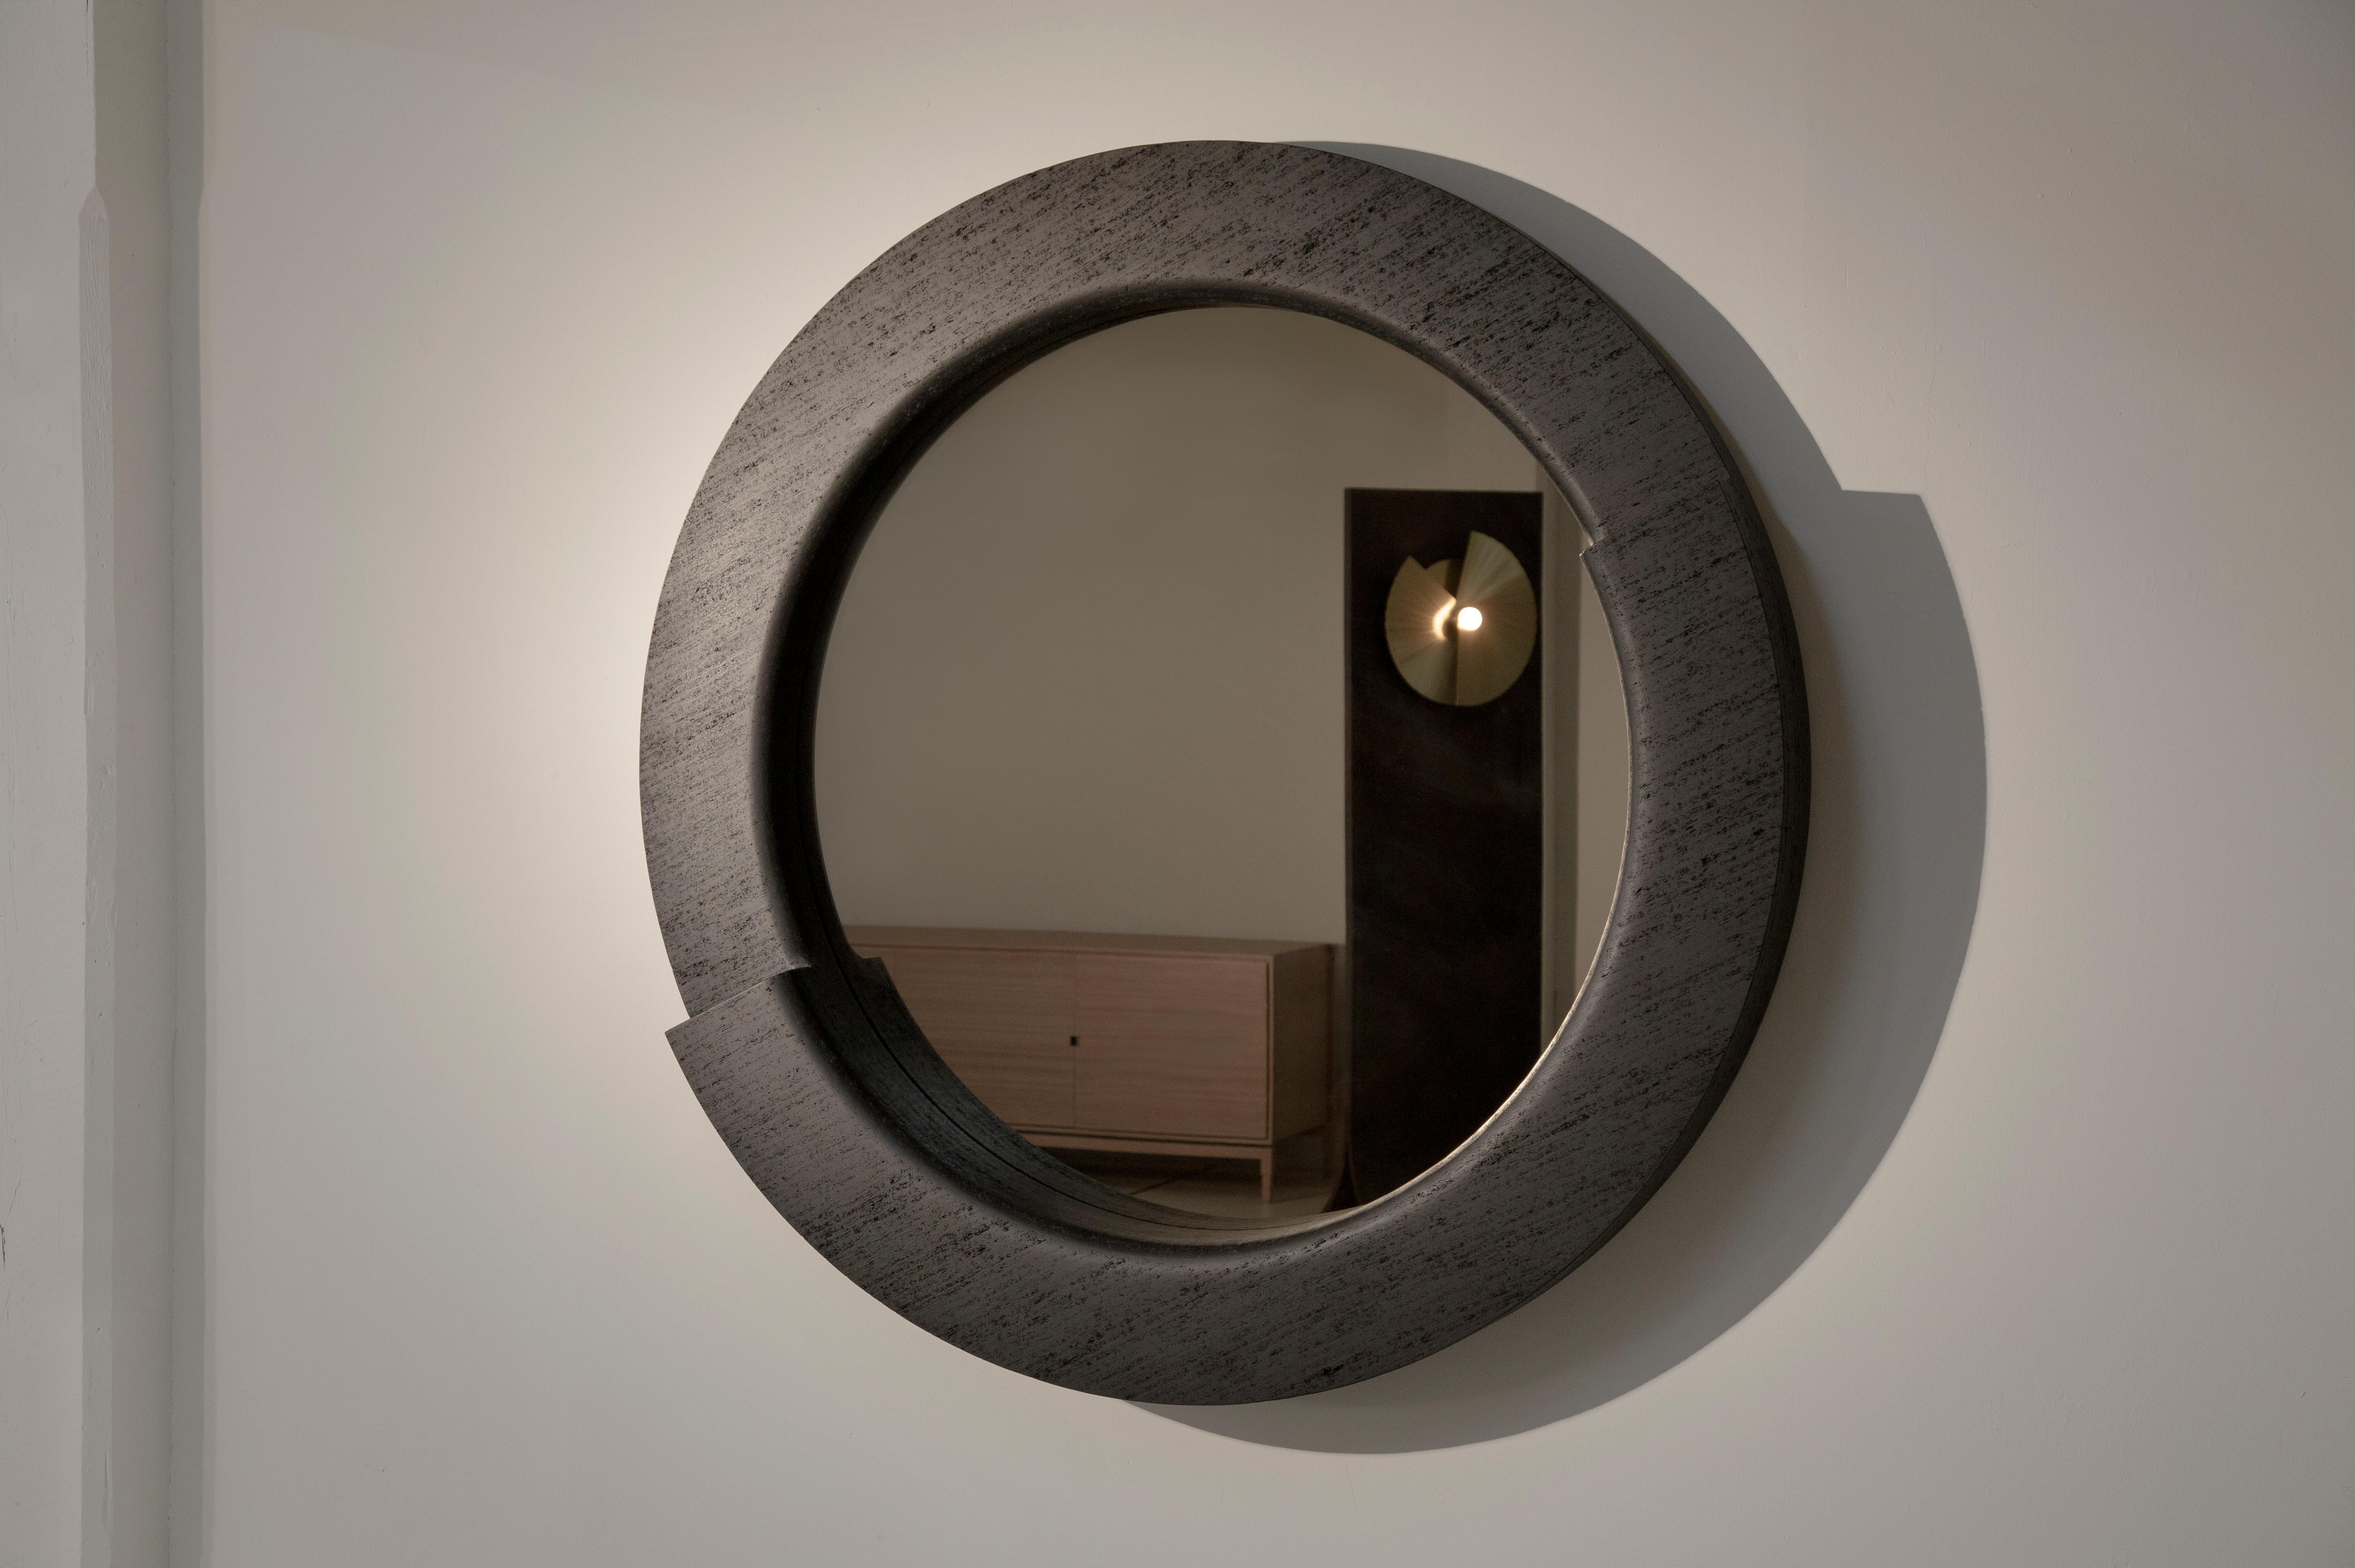 Brutalist architecturally inspired Tomba Mirror draws inspiration from Carlo Scarpa's Brion Tomb and its famous intersecting round windows. 
Layers of our proprietary Maykume (wood that resembles stone) are sculpted and carved to create bold curves